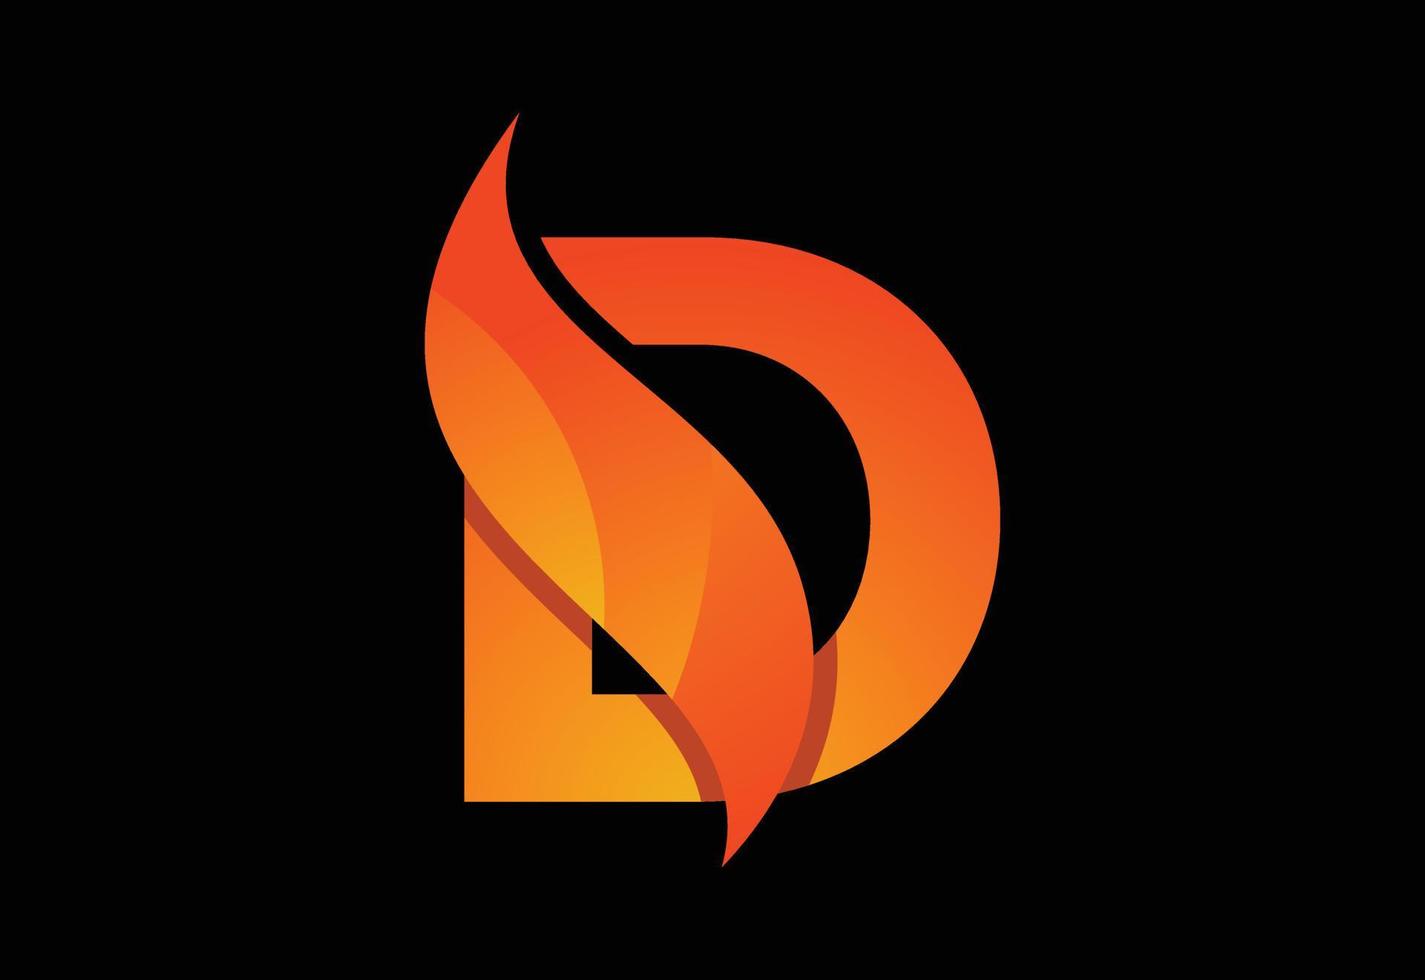 Initial D monogram letter with a swoosh or flame. Fire flames or swoosh design vector illustration